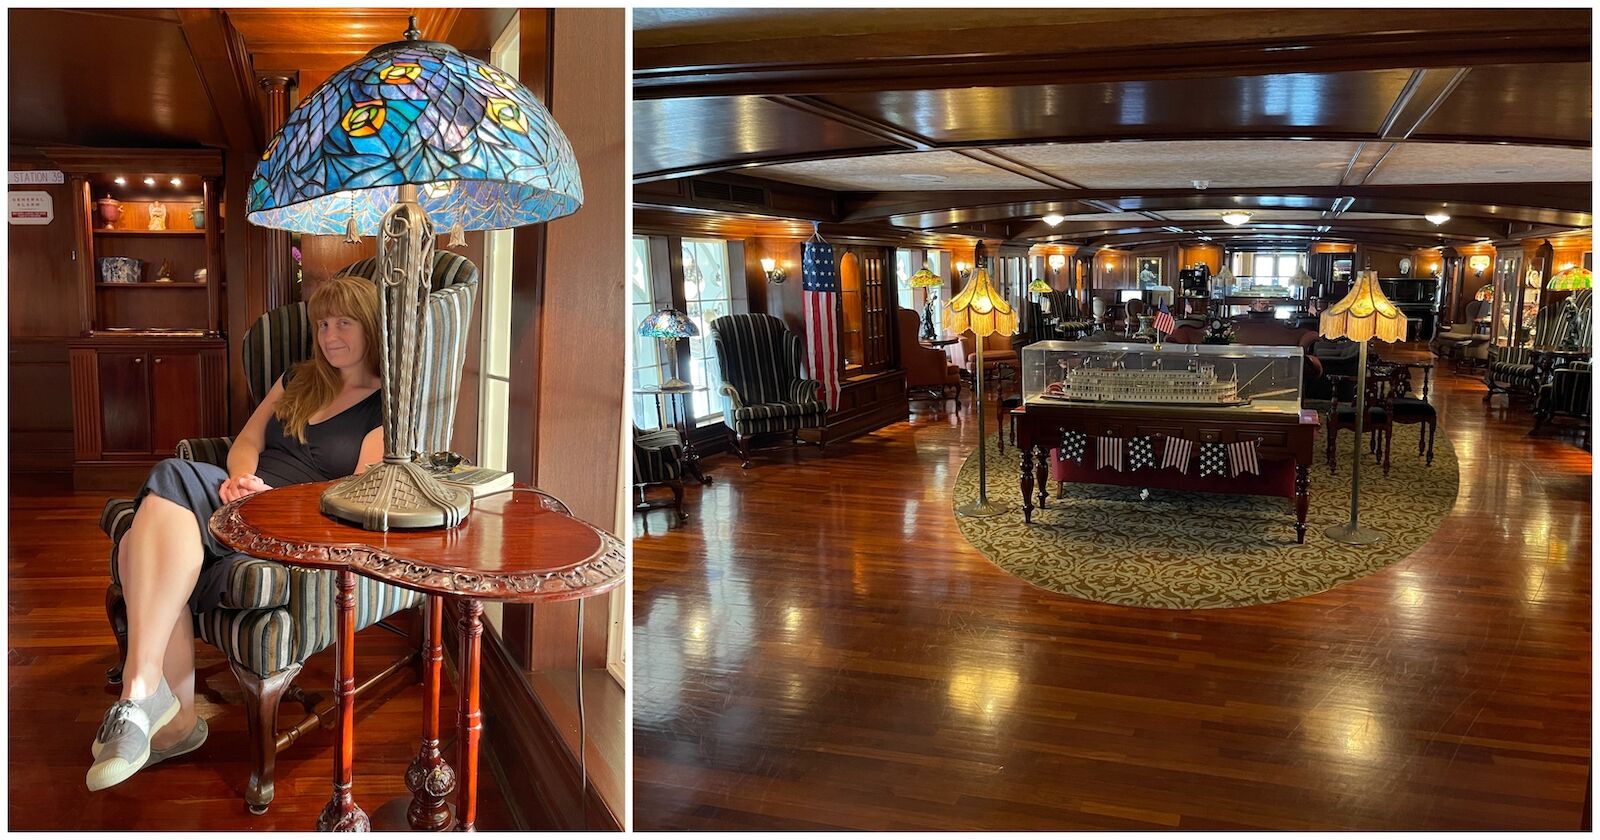 The Mark Twain room is probably one of the most luxurious aboard the American Queen